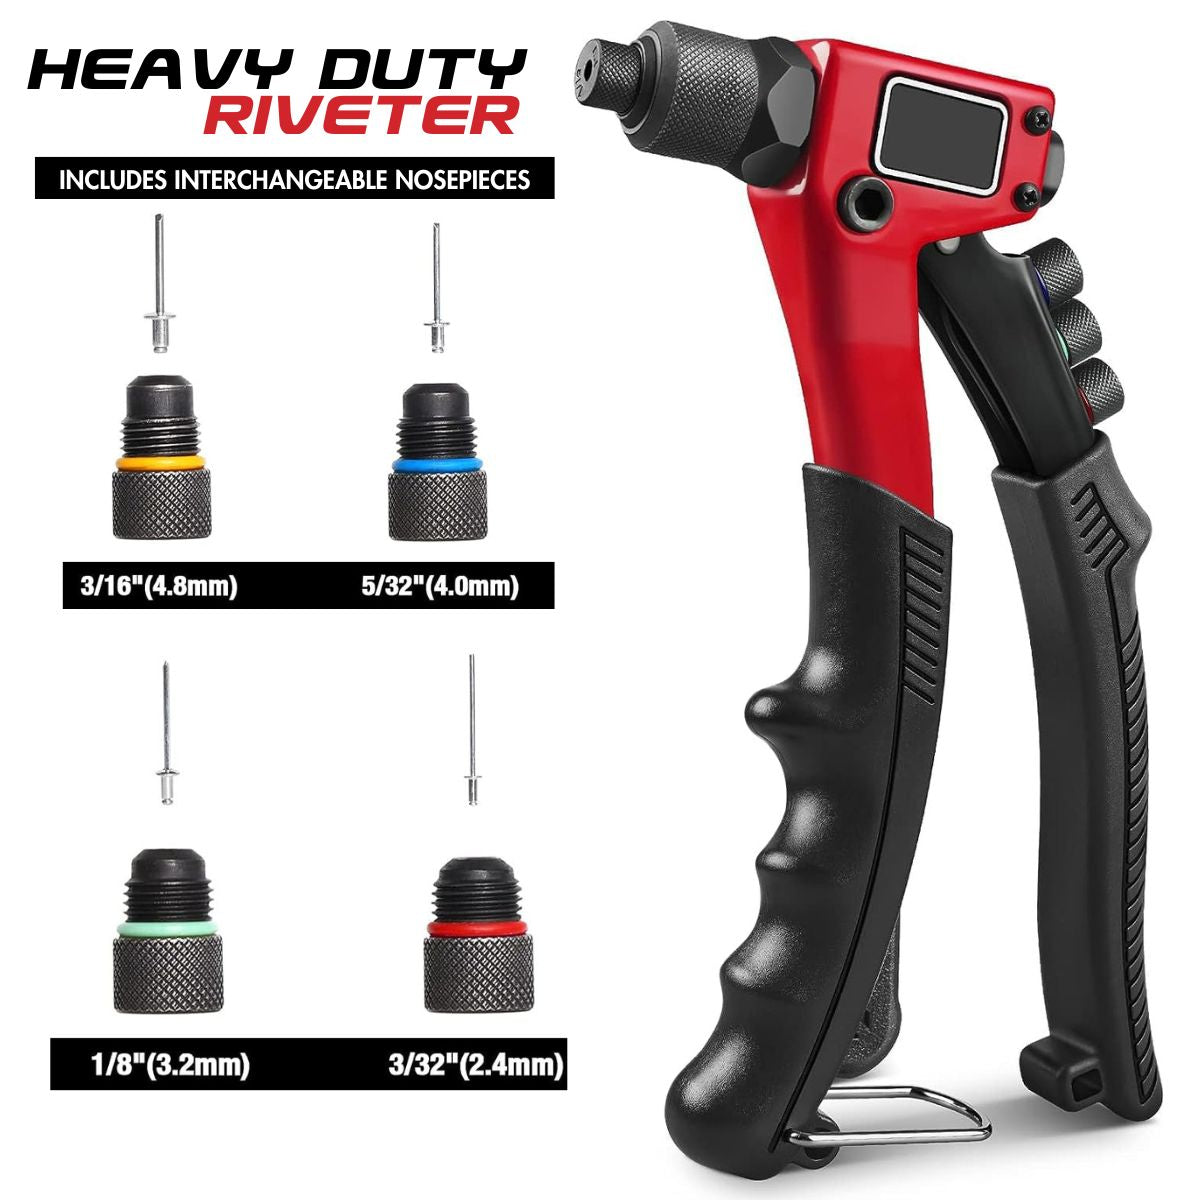 8" Heavy Duty Hand Riveter with 4 Replaceable Nozzles 2.4mm 3.2mm 4mm 4.8mm - South East Clearance Centre